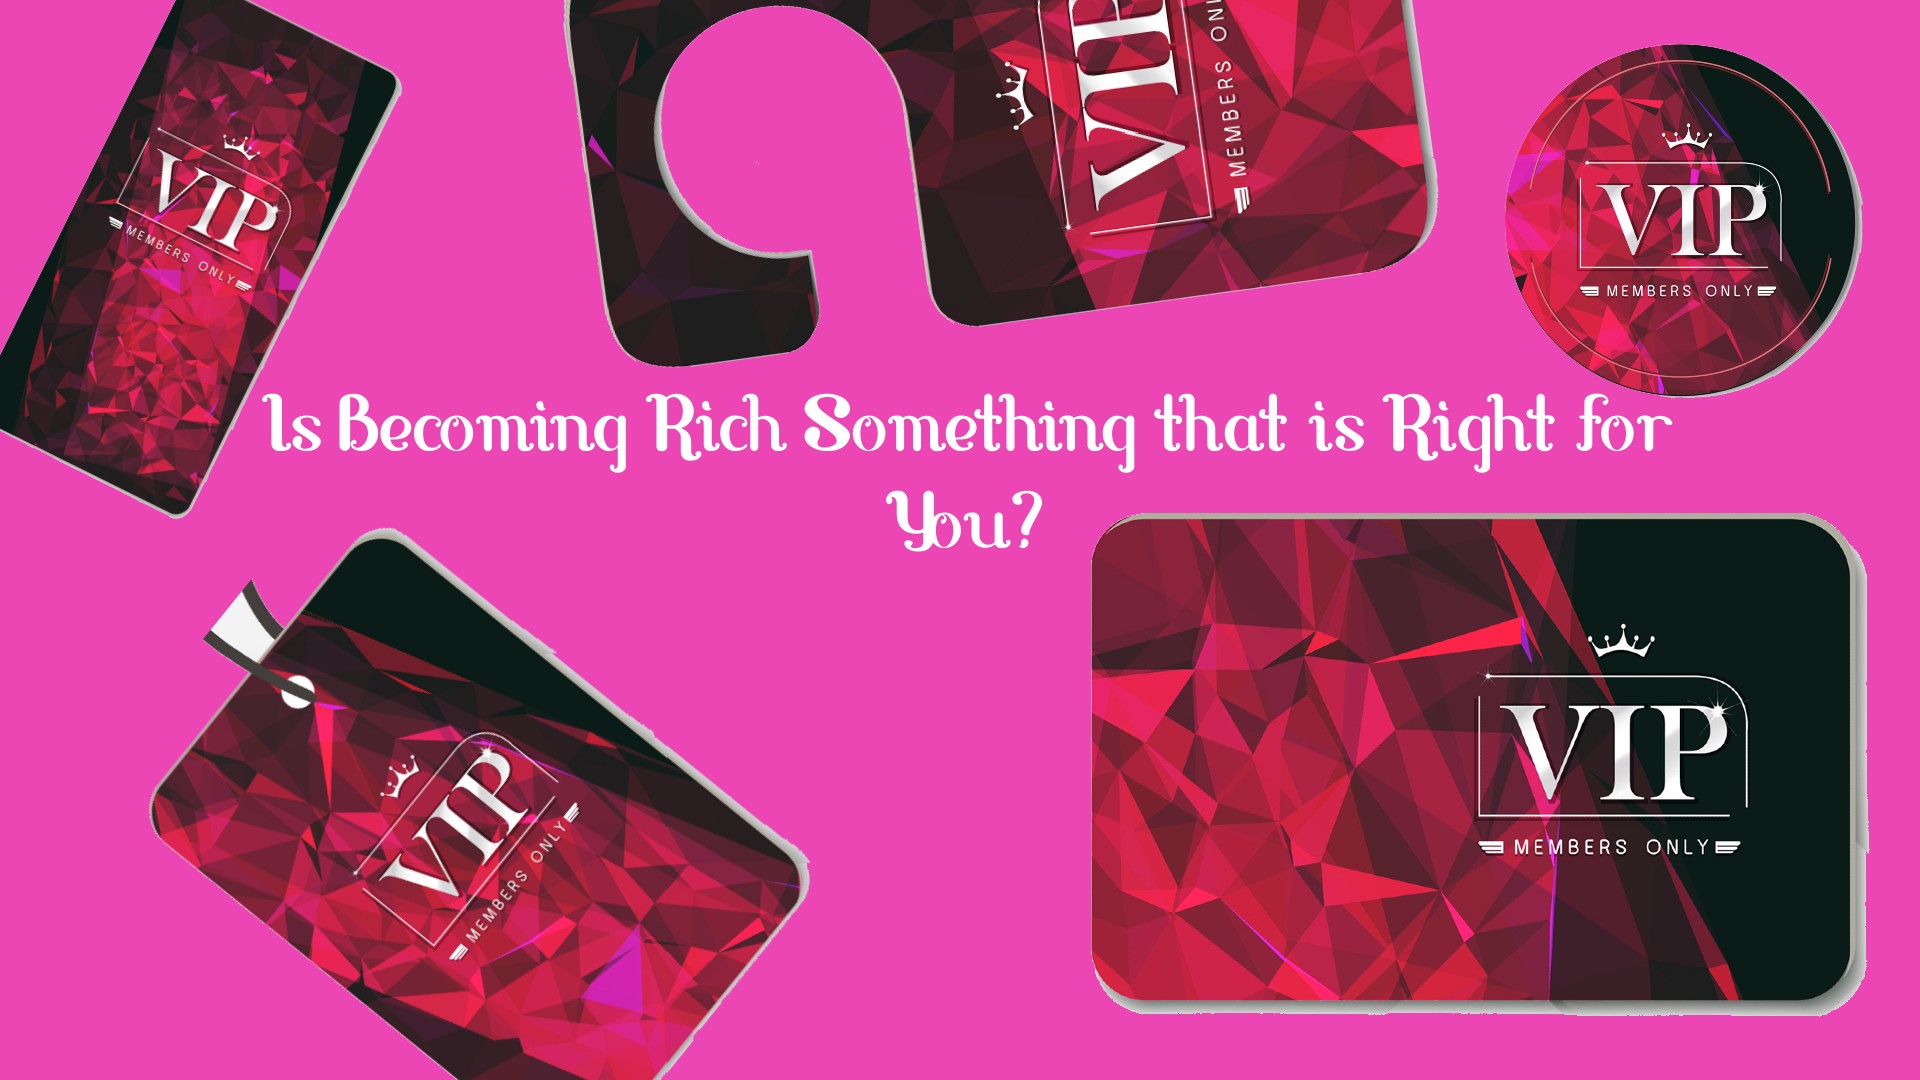 Is Becoming Rich Something that is Right for You?